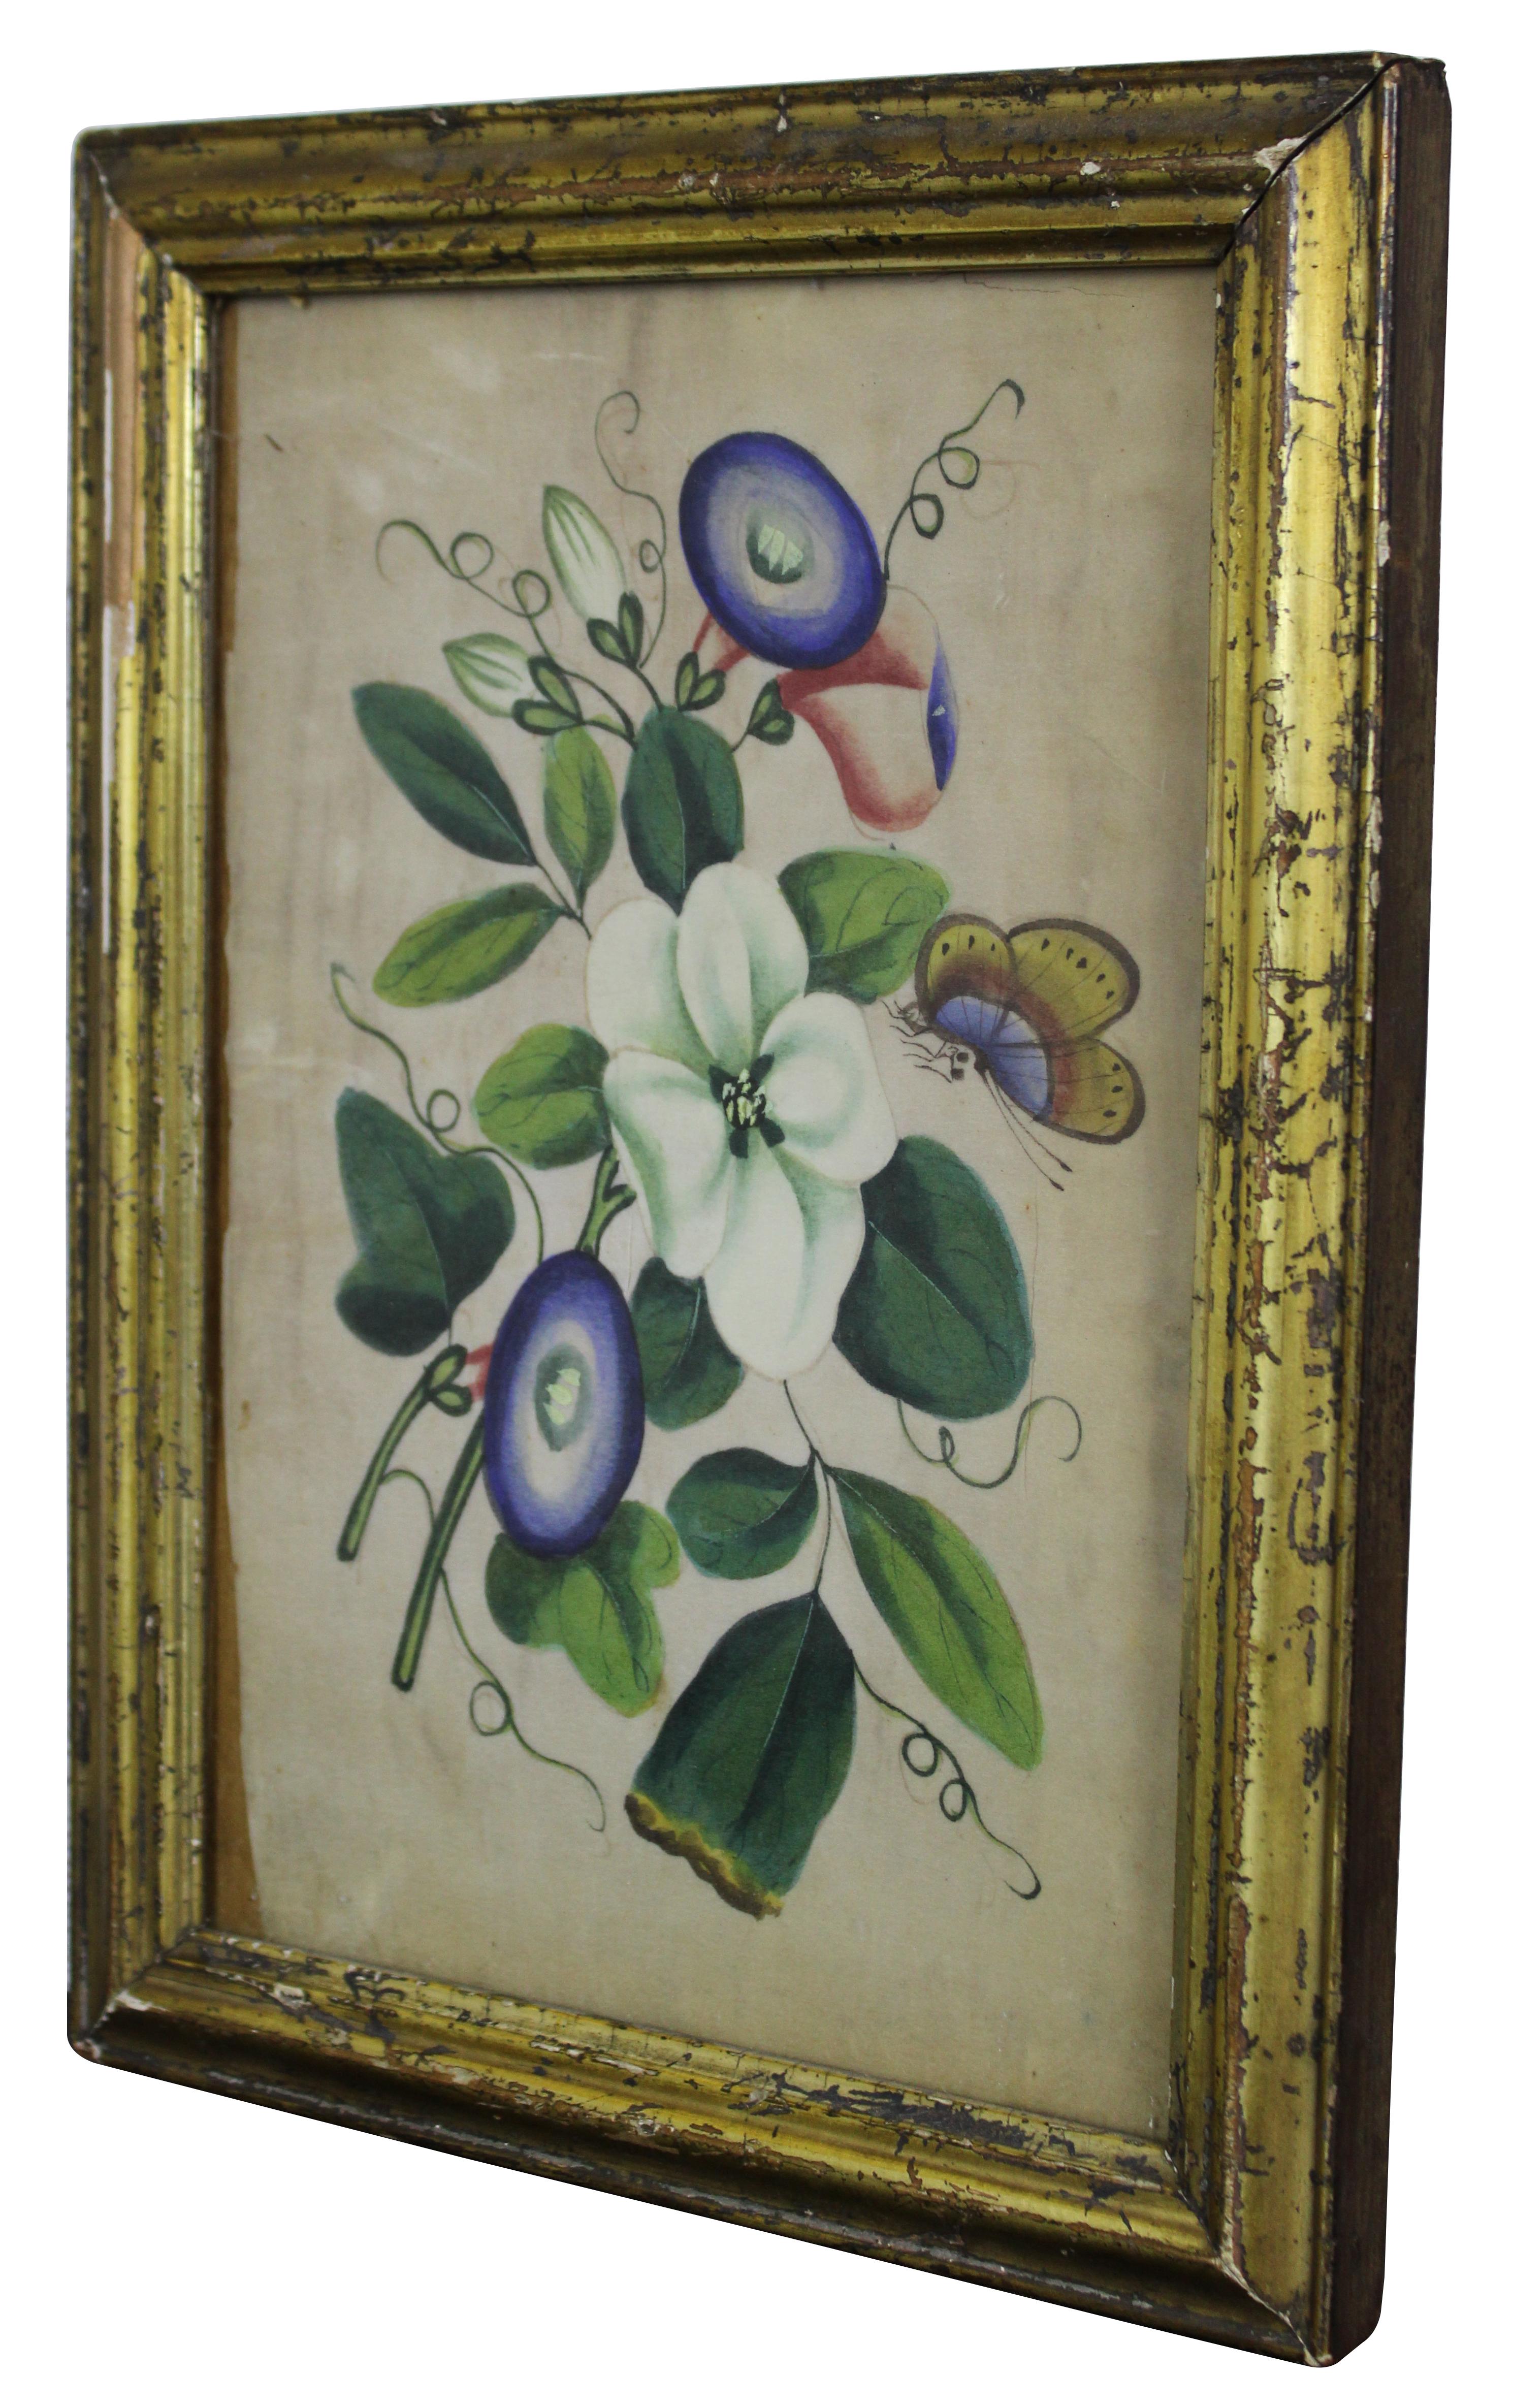 Antique floral watercolor on paper showing a bunch of flowers and a butterfly.

Measures: 8.5” x 1” x 11.5” / Sans frame - 6.5” x 9.5” (width x depth x height).
    